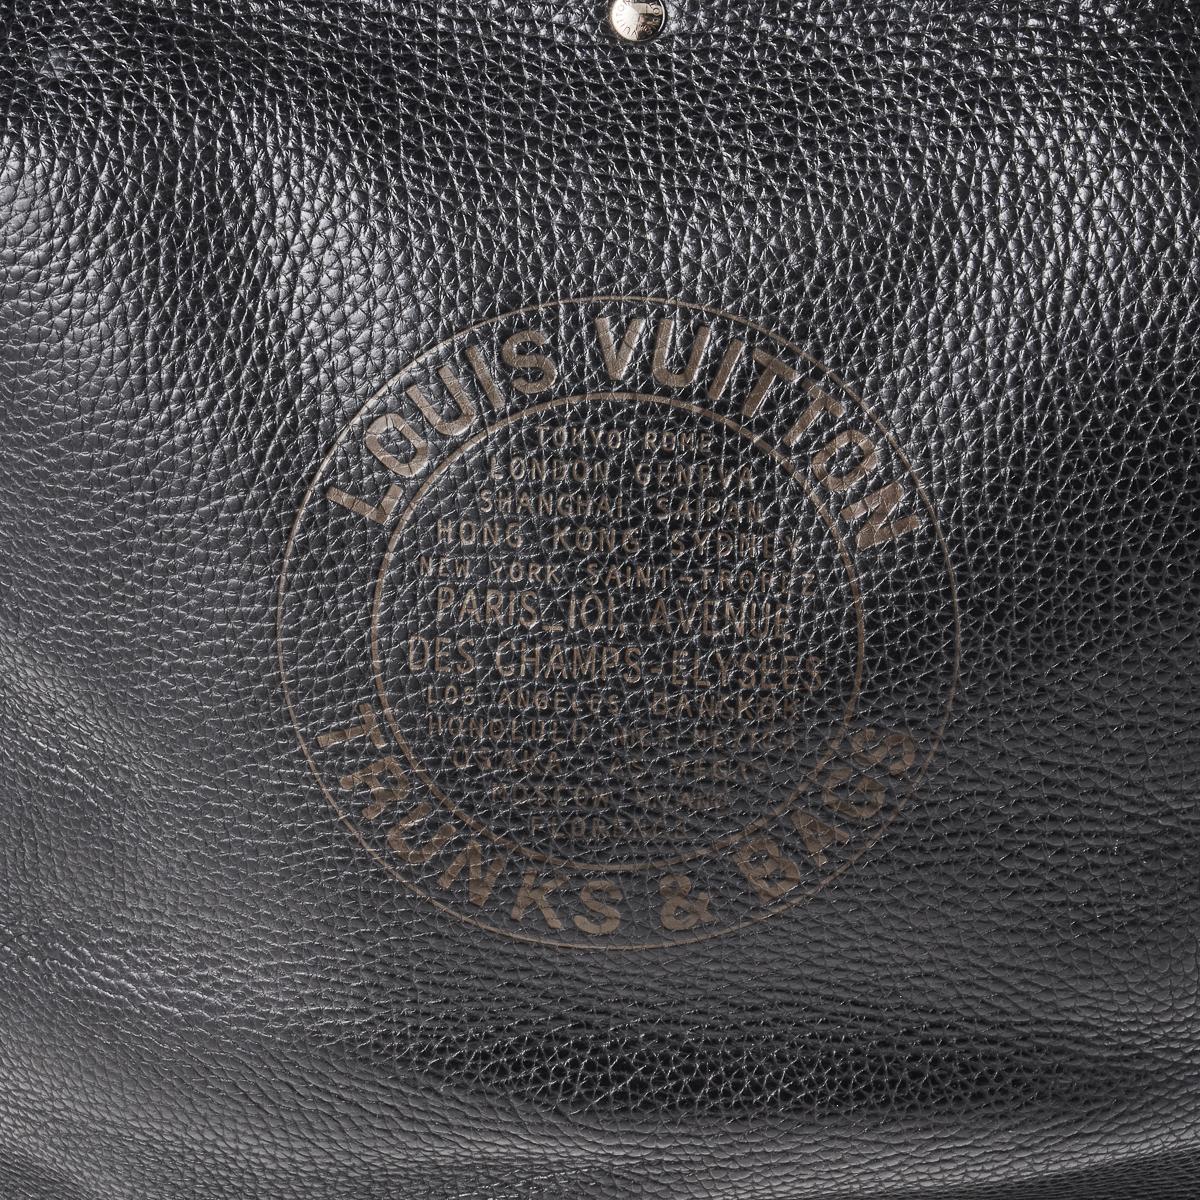 Louis Vuitton Tobago 'Trunks & Bags Suhali' Limited Edition Bag